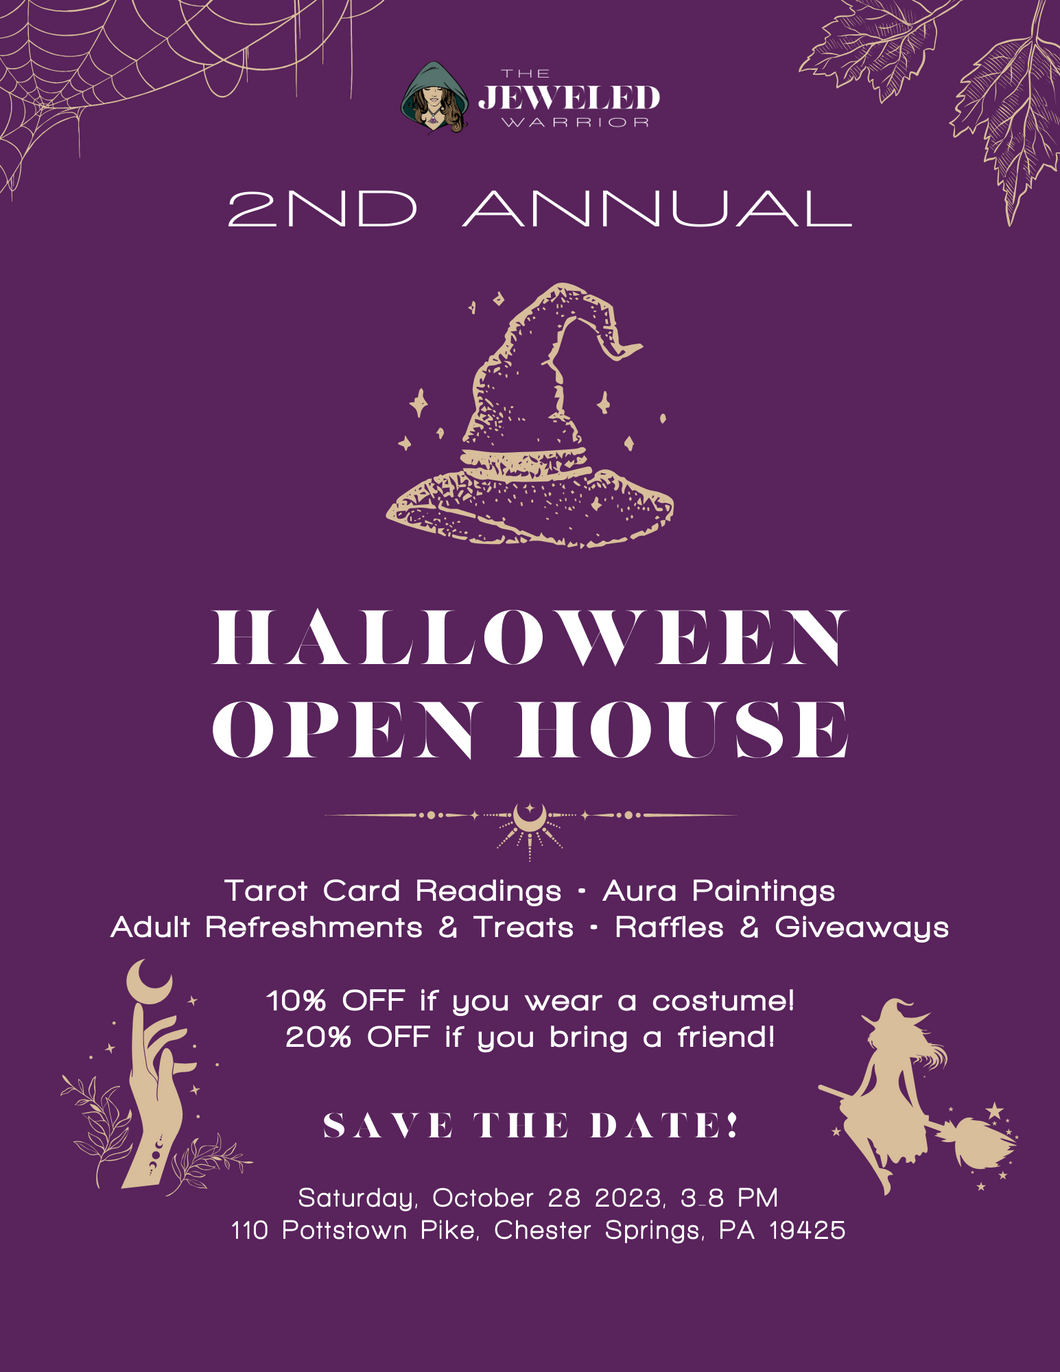 2nd Annual Halloween Open House